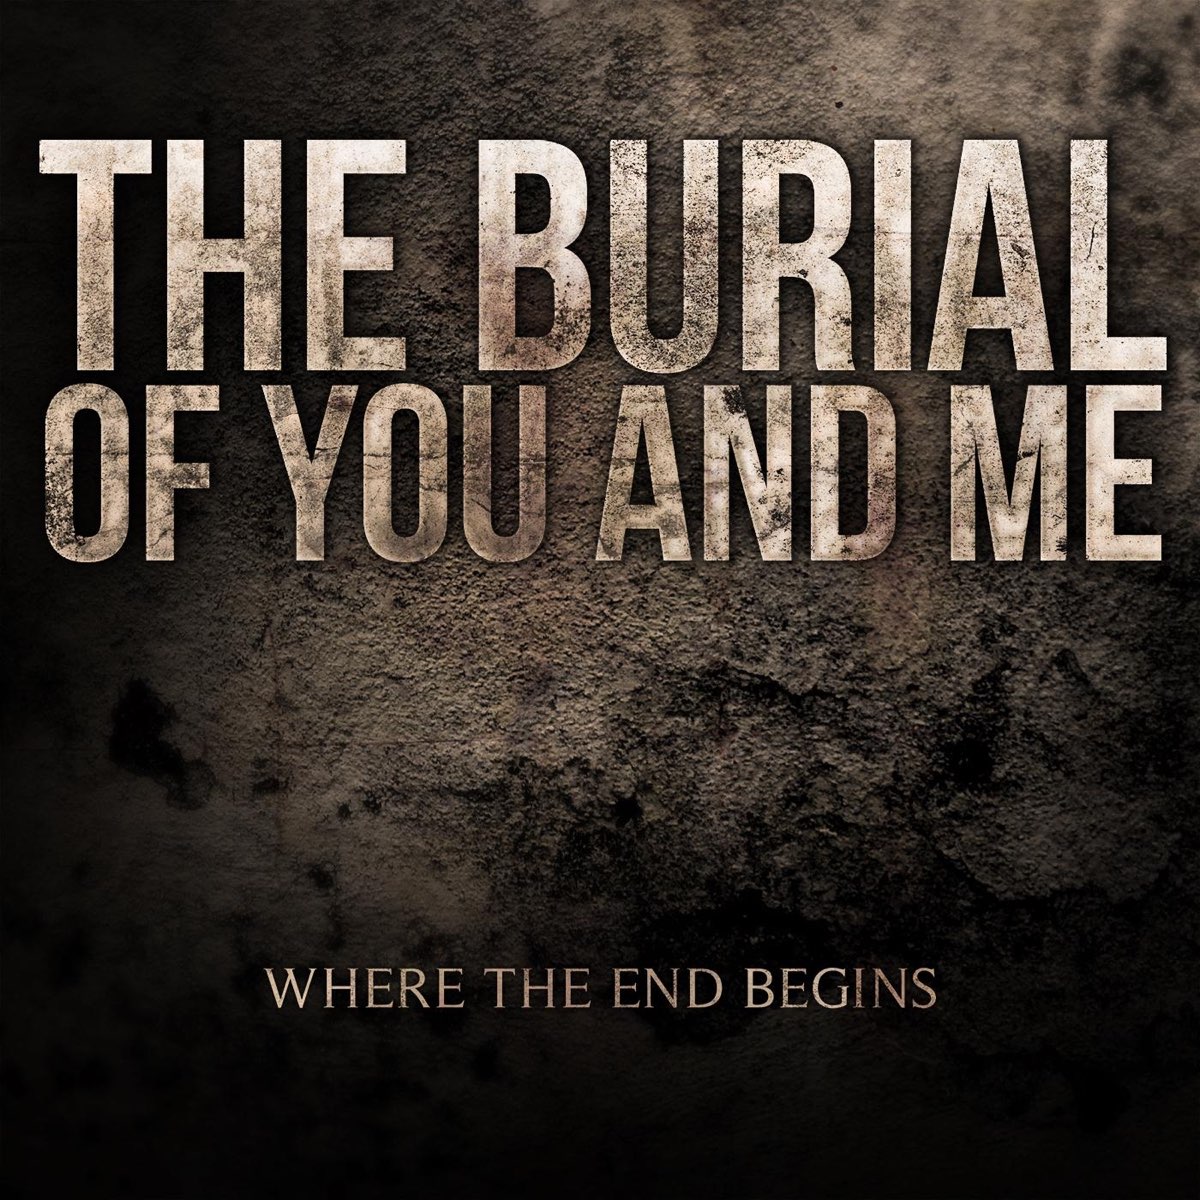 End of begging djo. Burial. The Burial of you and me. Begin end. End of beginning текст.